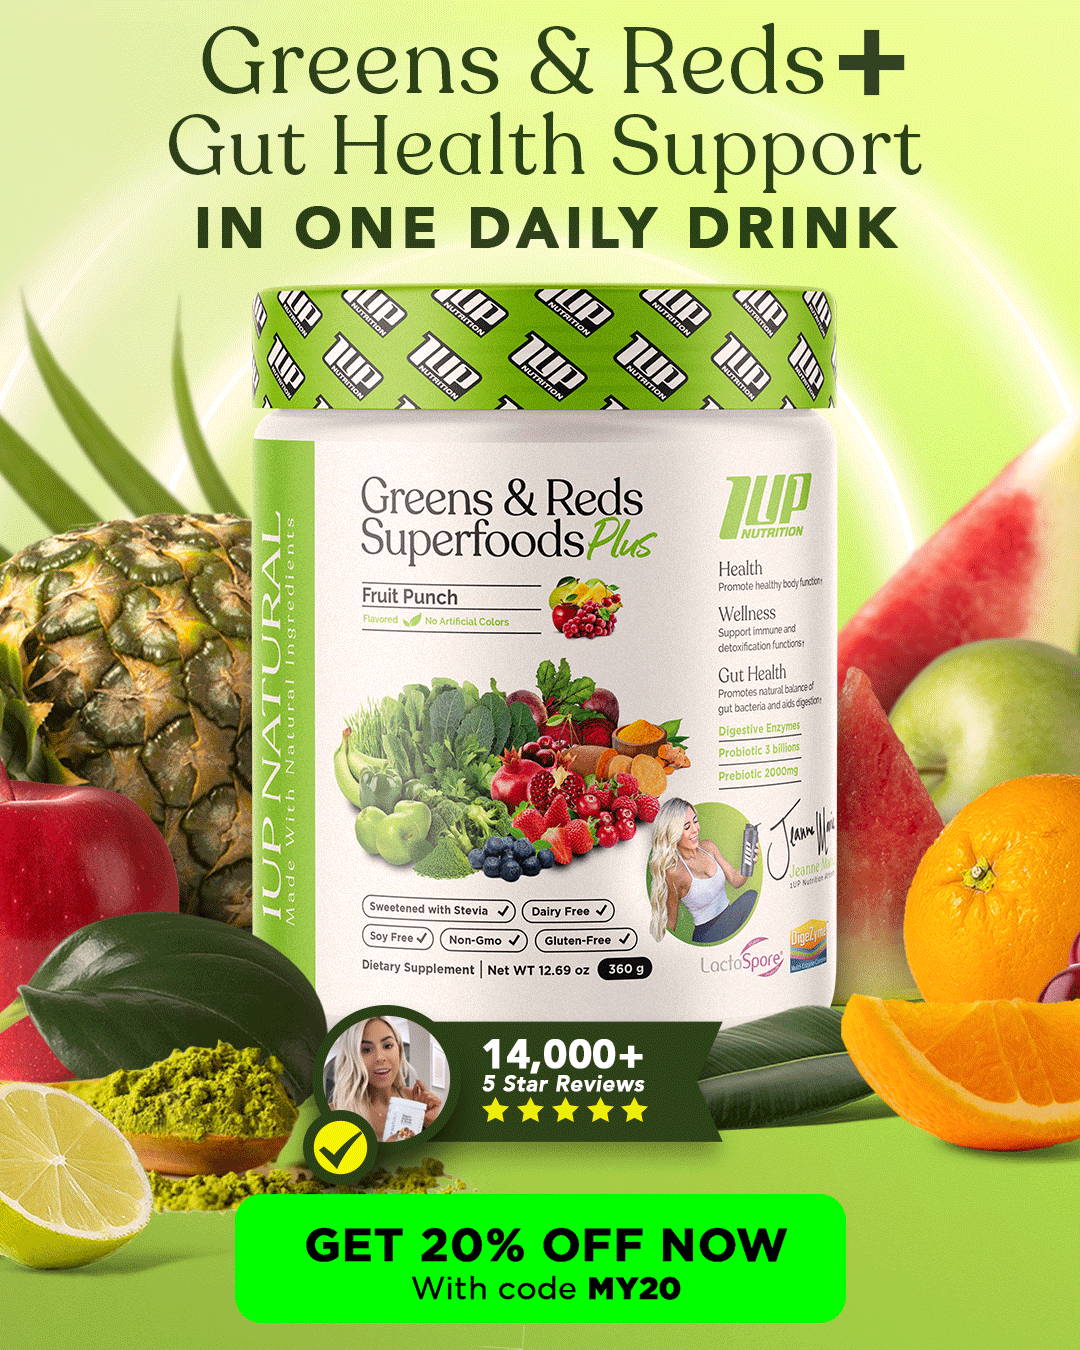 Greens and Reds Superfoods – 1 Up